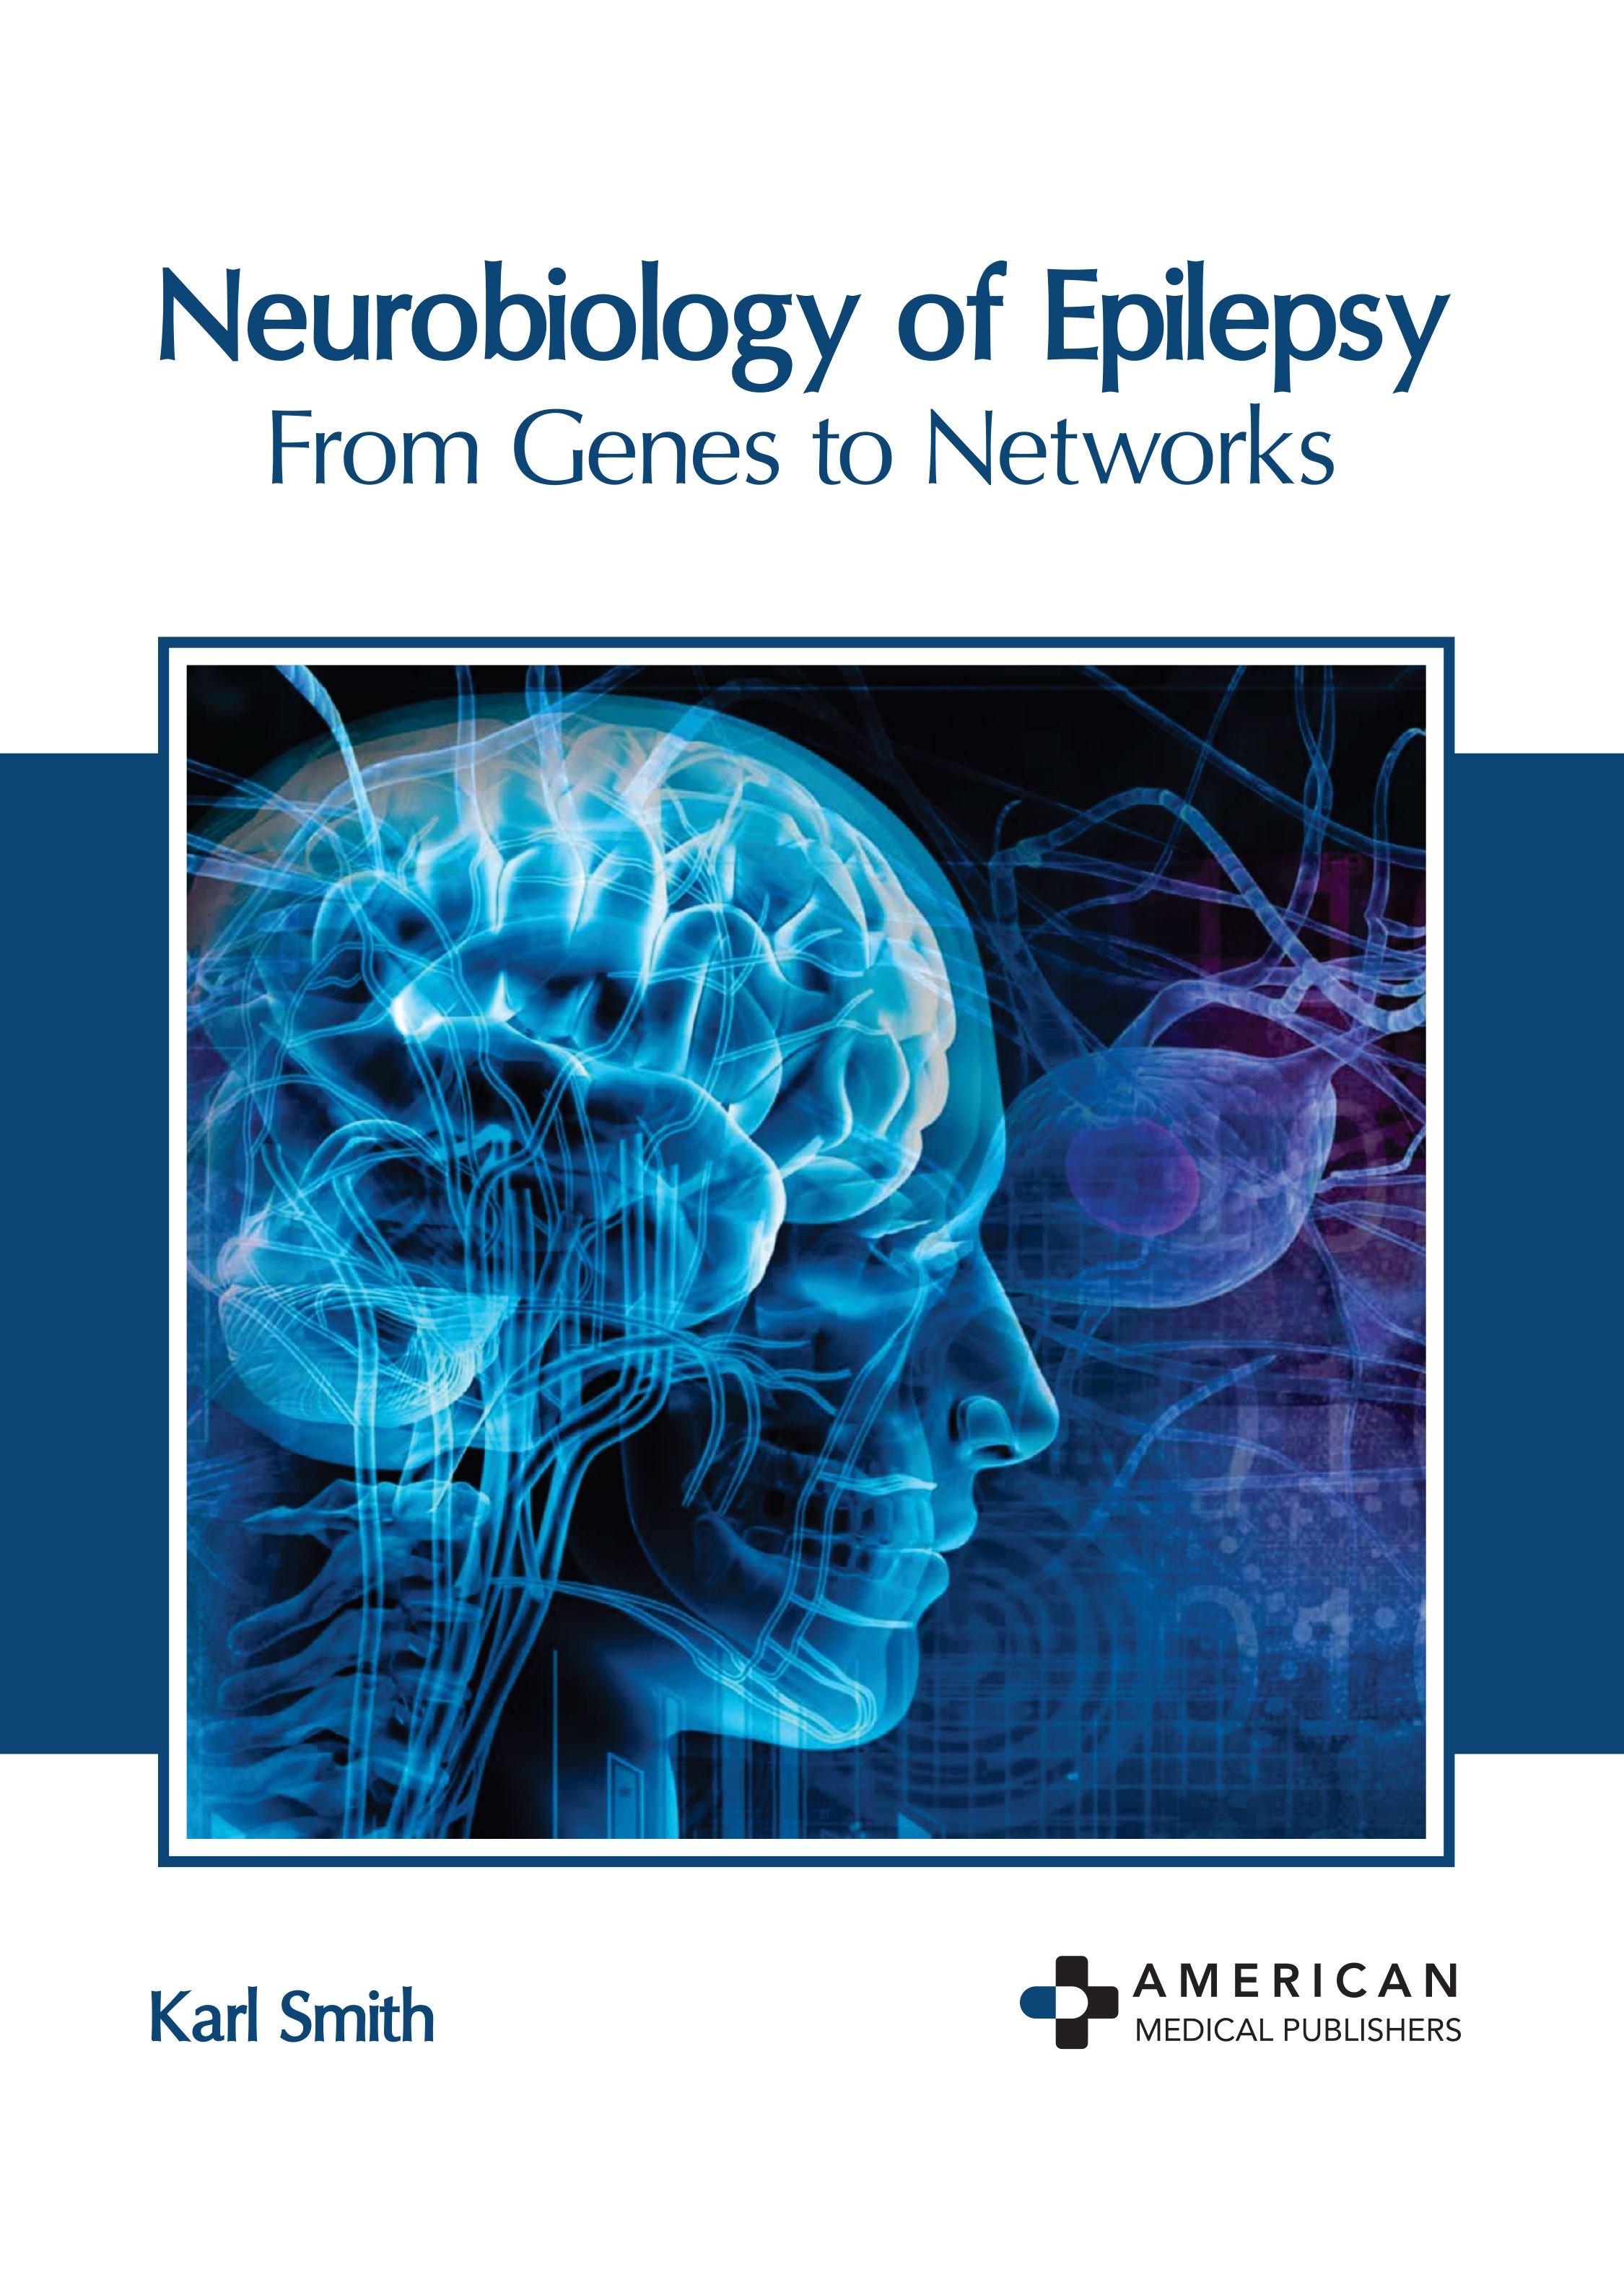 NEUROBIOLOGY OF EPILEPSY: FROM GENES TO NETWORKS